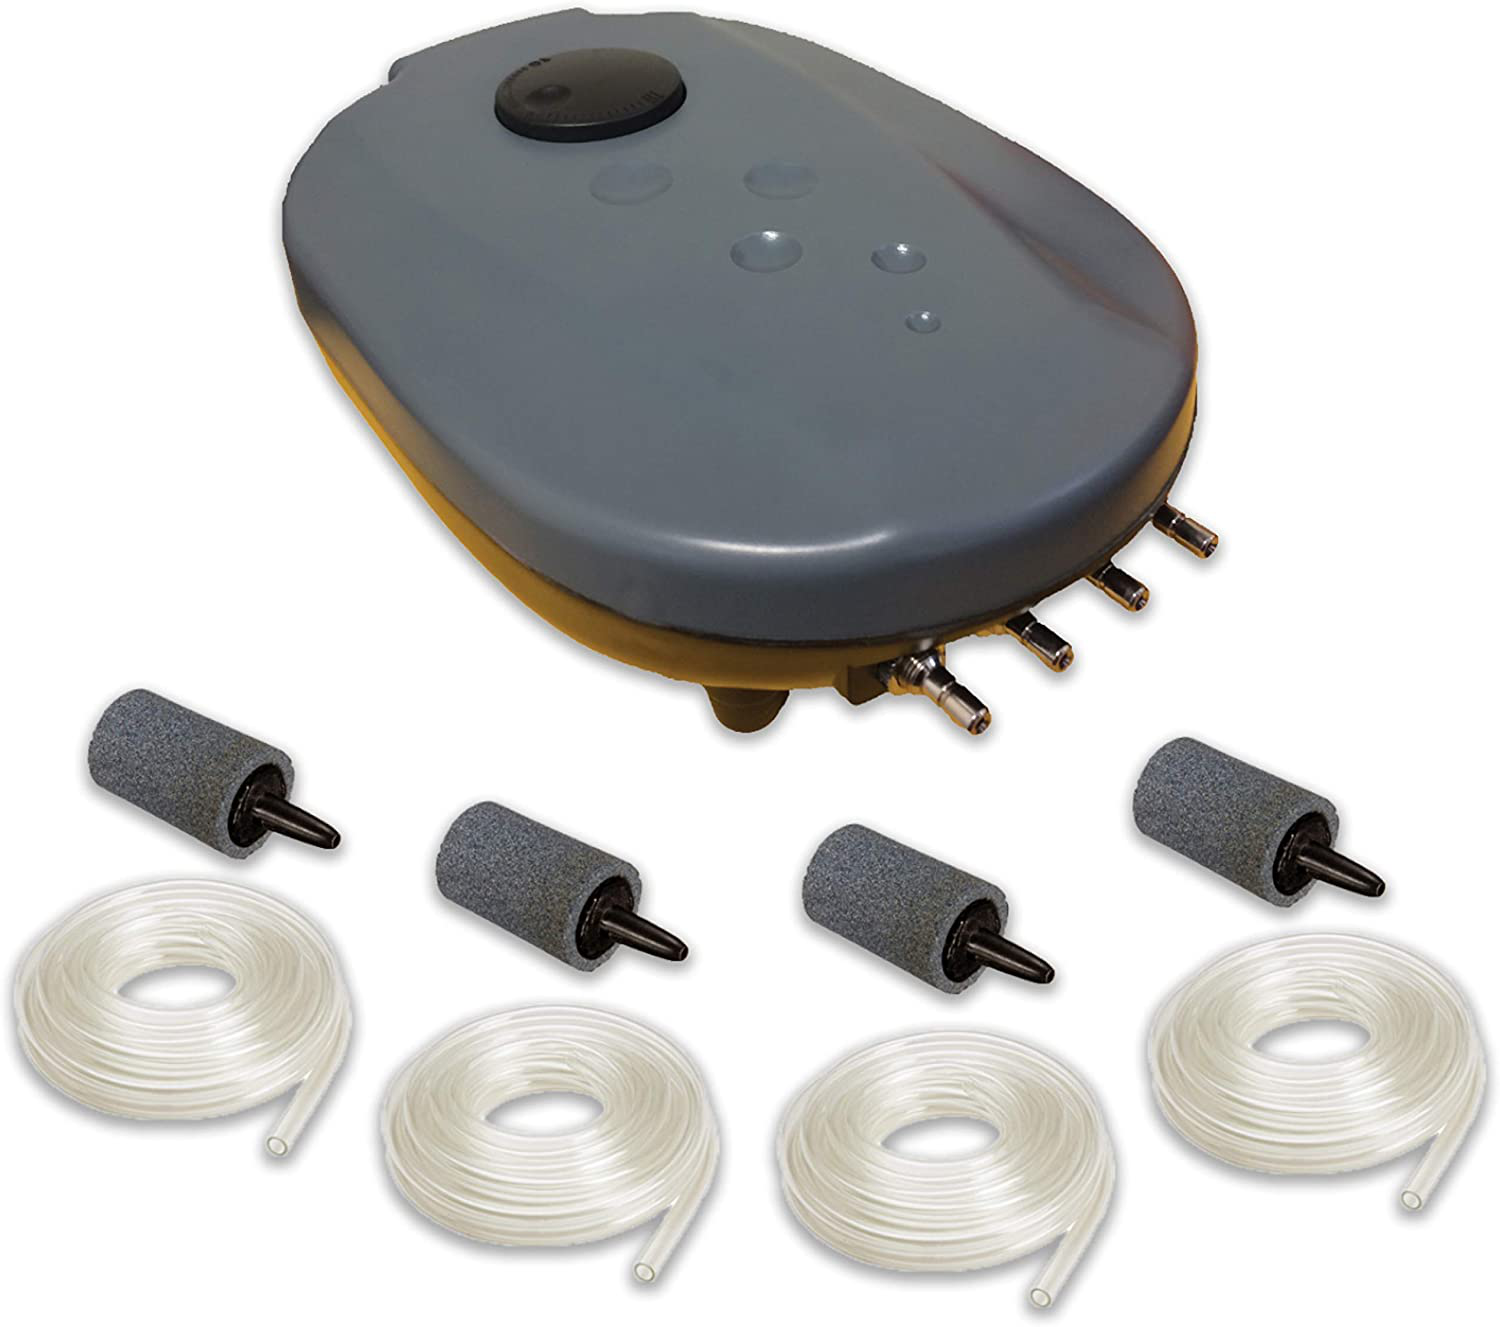 HALF off PONDS Patriot Pond 0.45 Cubic Feet per Minute Air Pump for Aquariums, Tanks, and Ponds to 1,500 Gallons, Water Gardens & Fish Ponds - PA-12 Animals & Pet Supplies > Pet Supplies > Fish Supplies > Aquarium & Pond Tubing HALF OFF PONDS Air Pump Only .42 CFM Ponds to 1,500 Gallons 